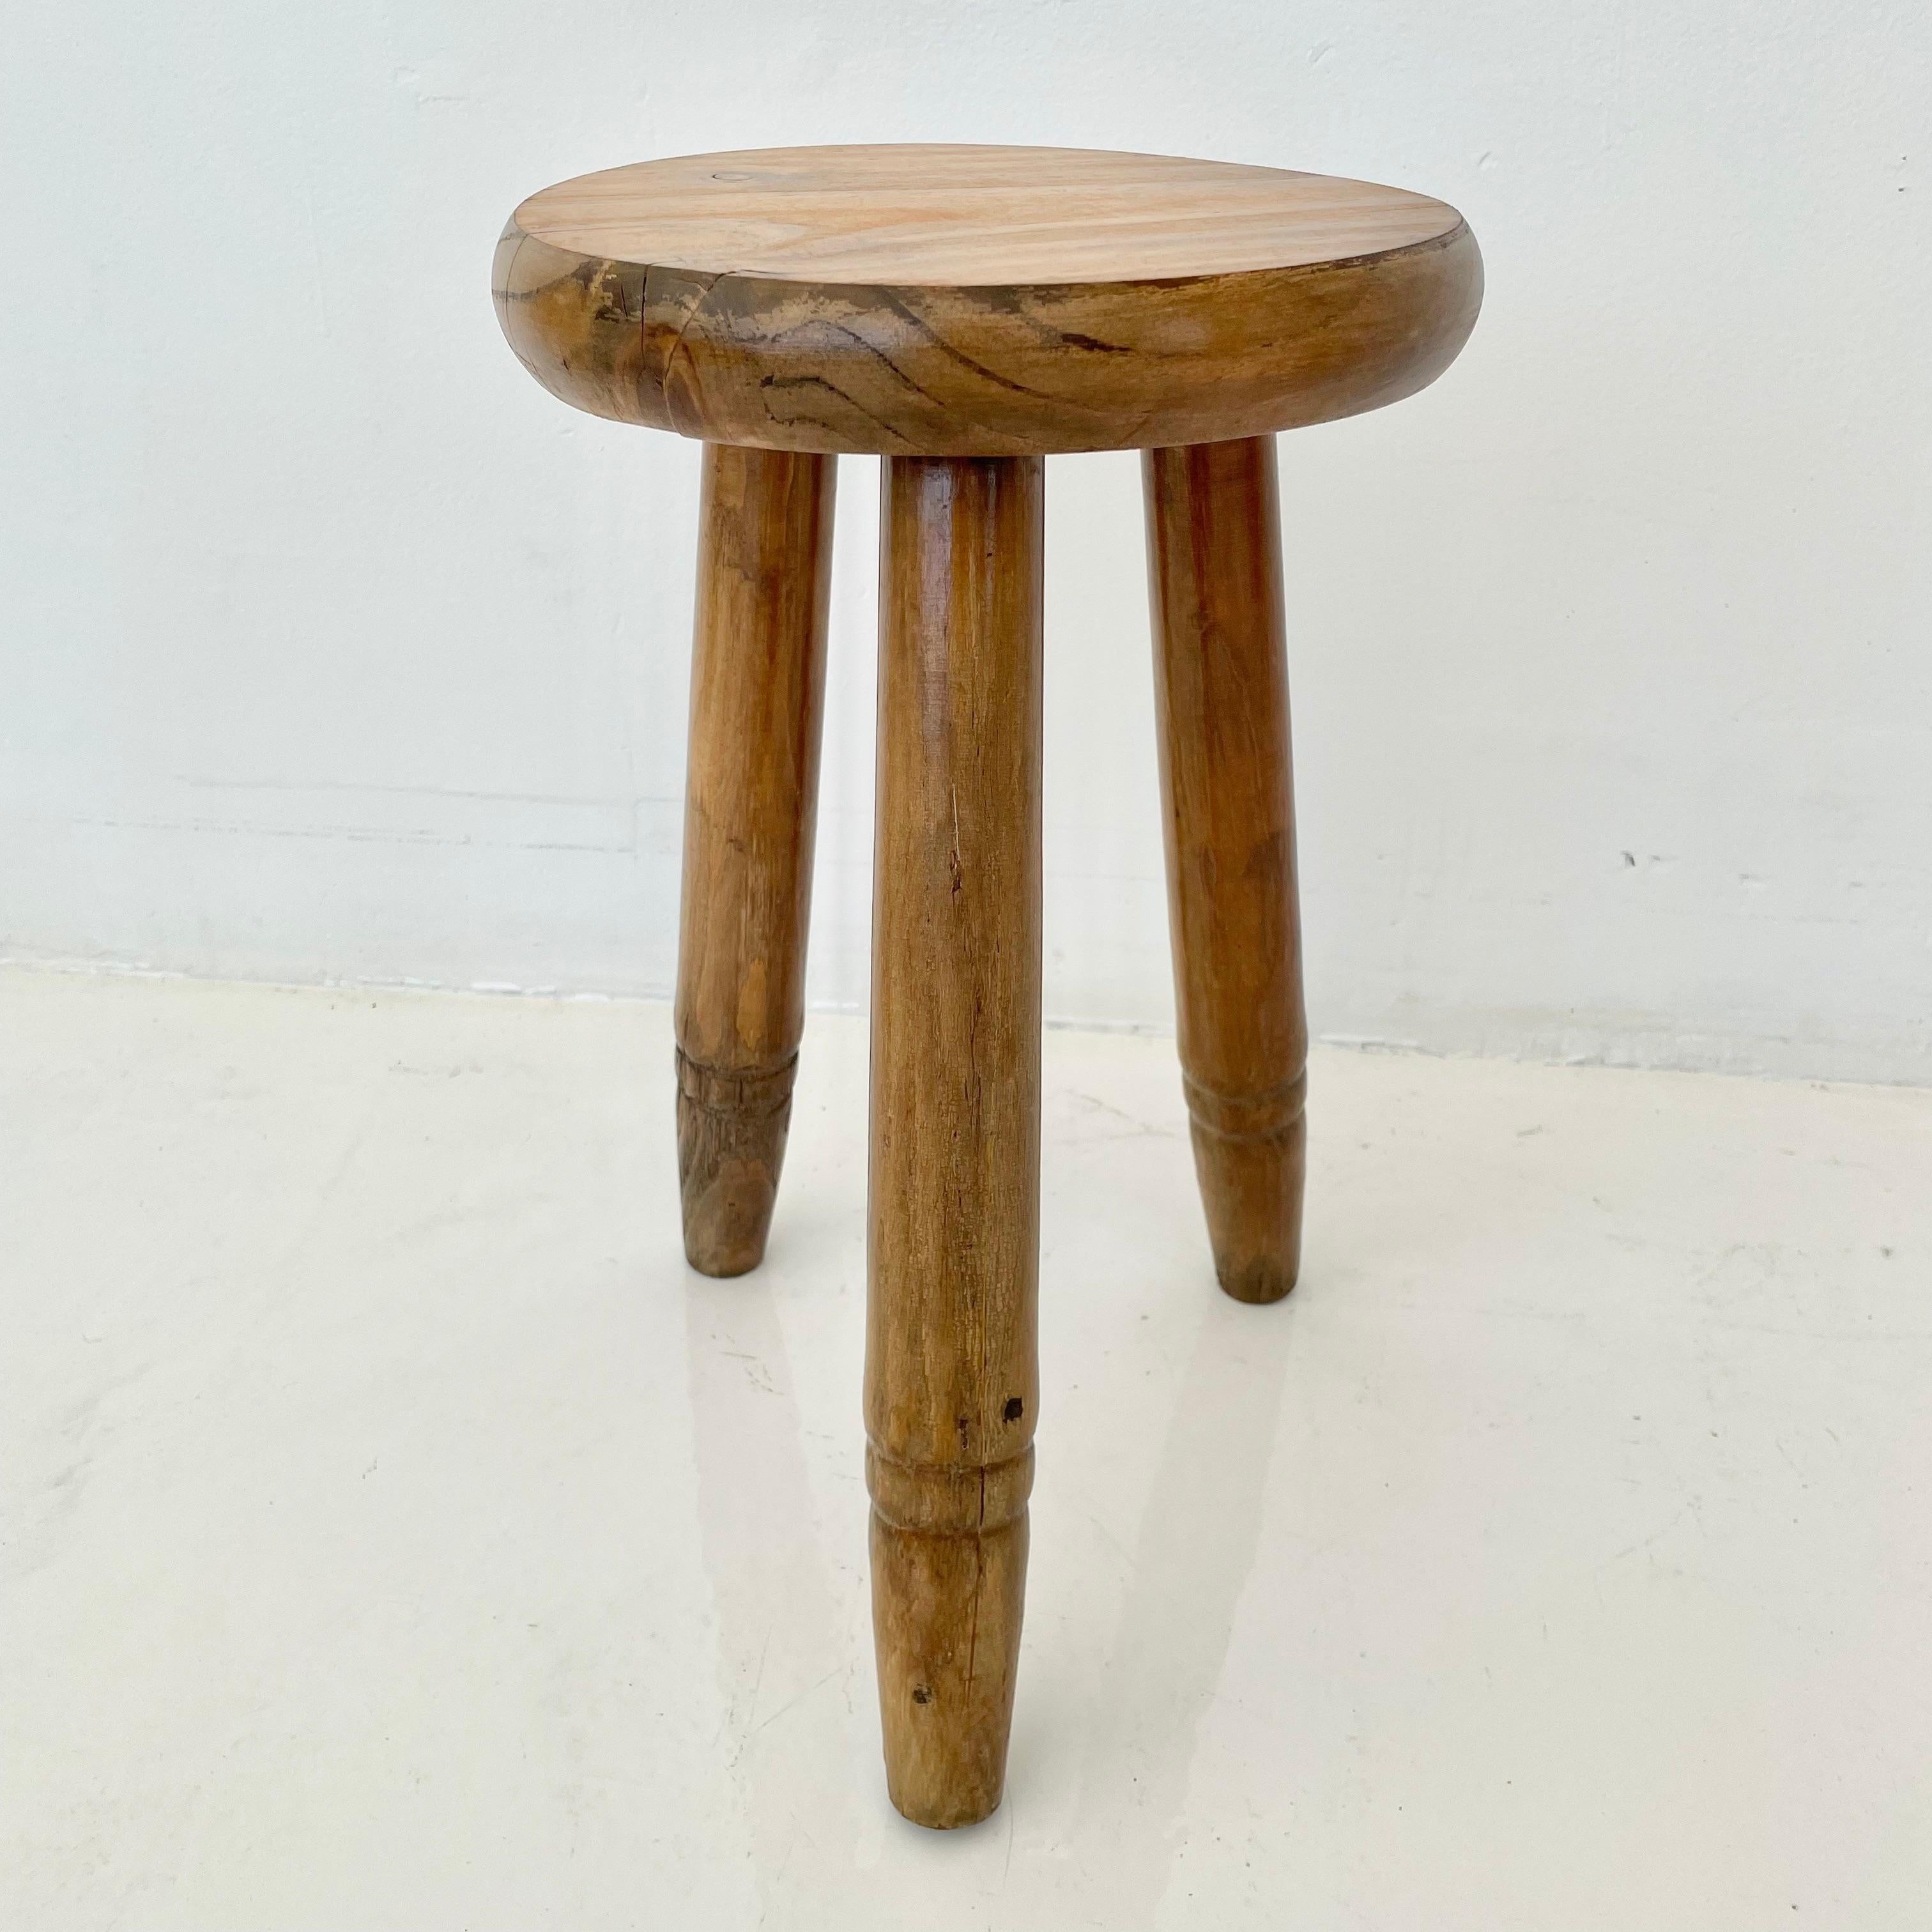 Vintage wooden stool made in France, circa 1950s. Thick seat and tripod legs with ribs that taper near the bottom. No nails or hardware. Great lines and shape. Rustic petite stool with a ton of presence. 
  